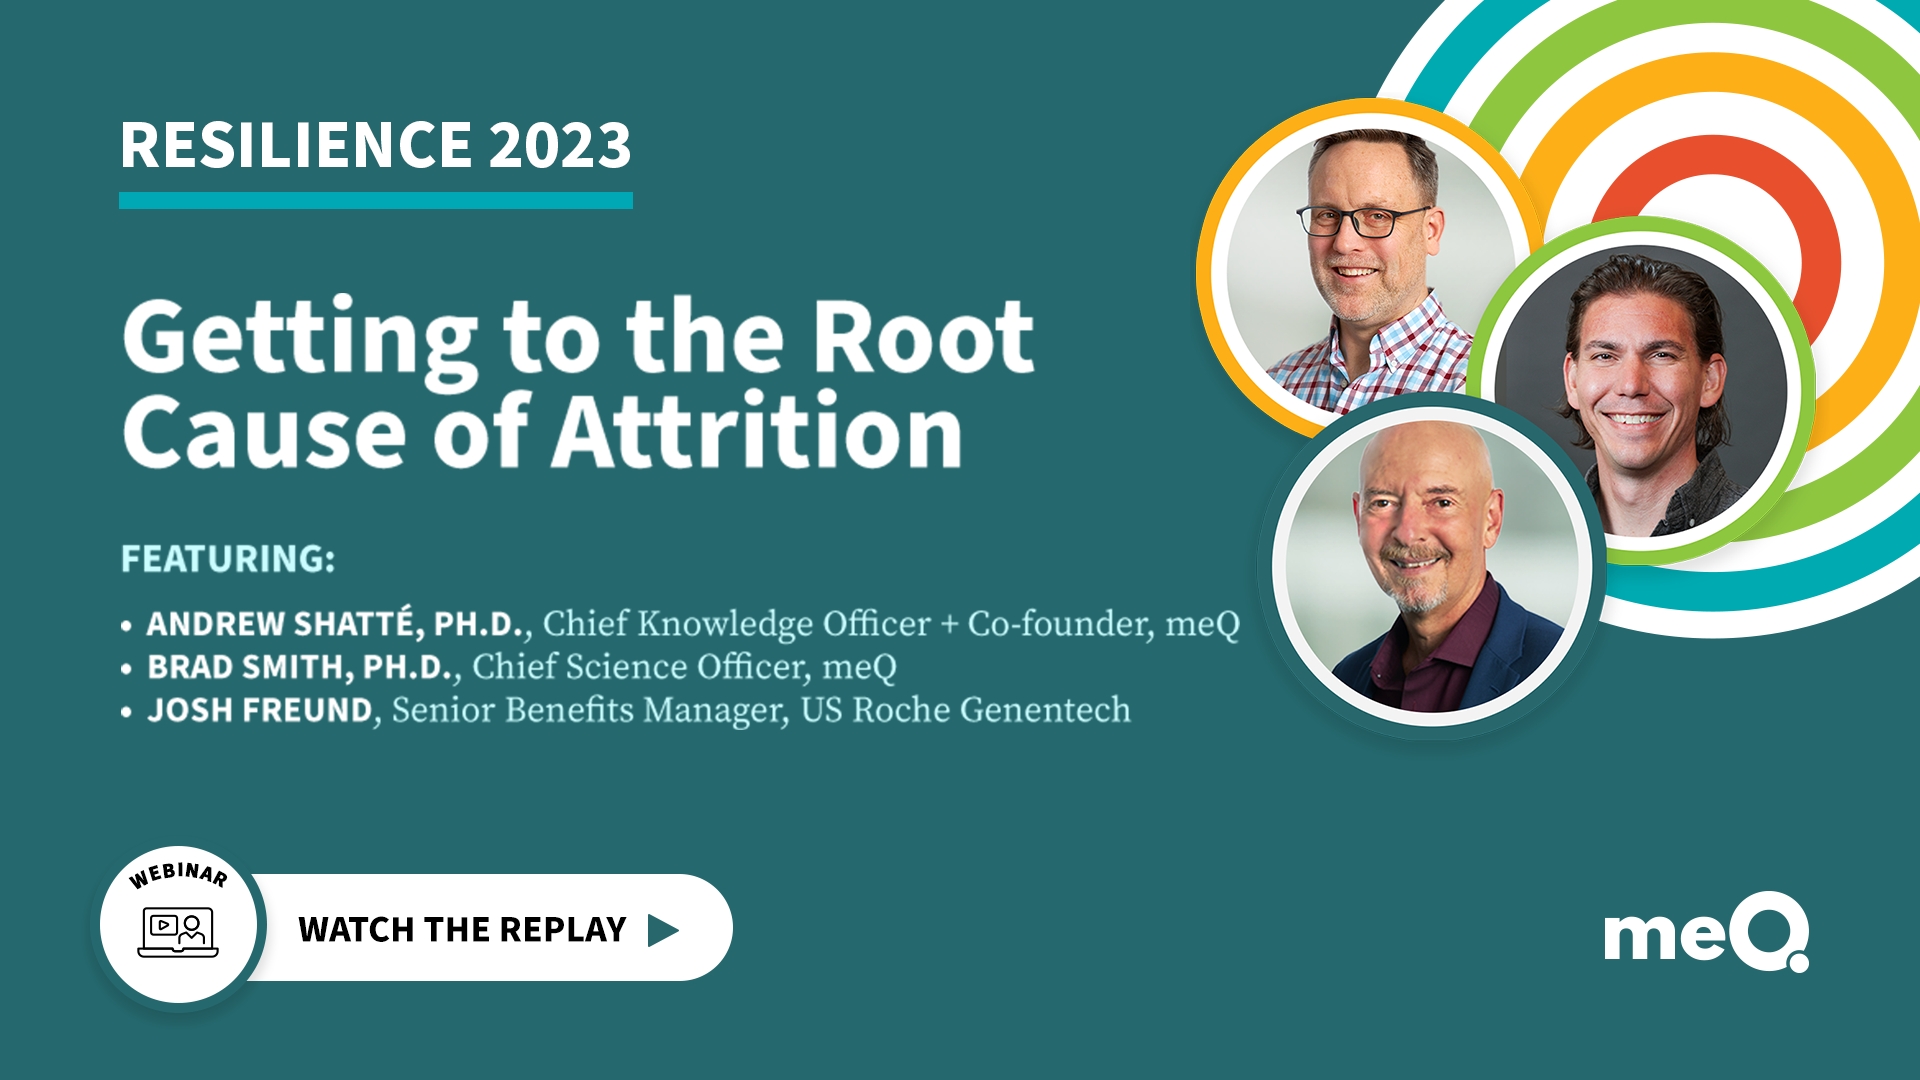 Getting to the Root Cause of Attrition